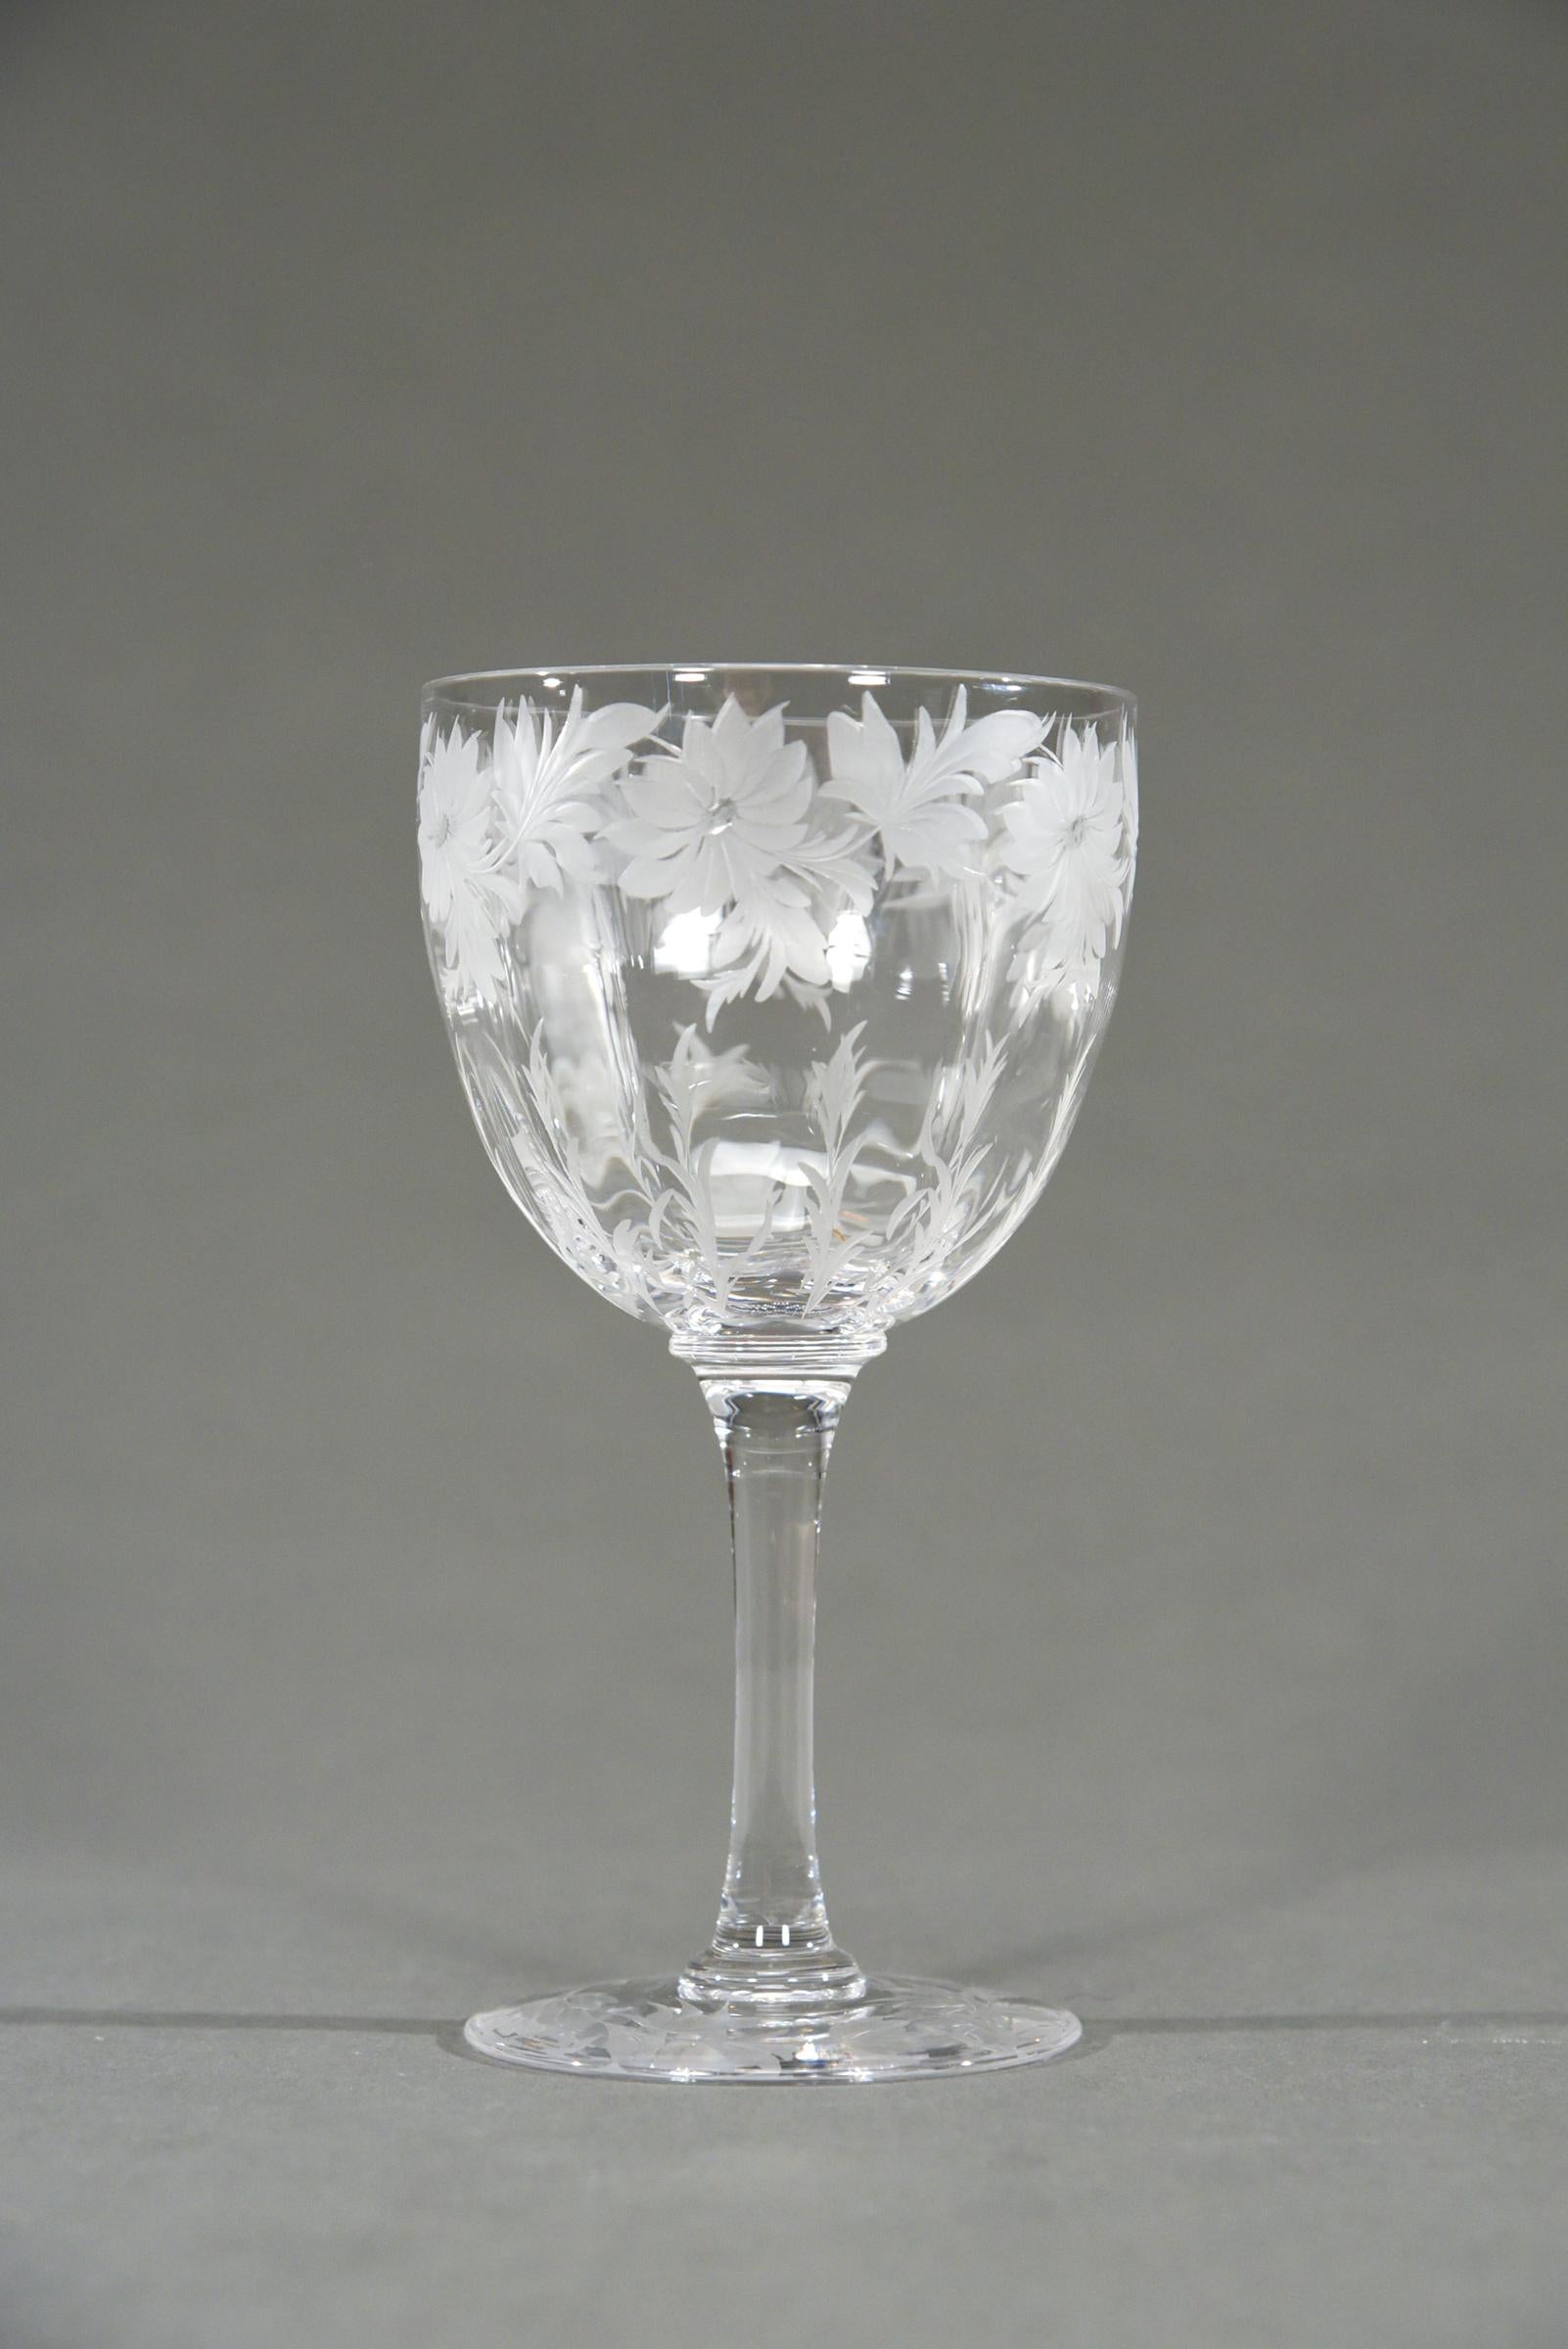 12 Hand Blown Signed Libbey Wheel Cut Crystal Goblets Arts & Crafts Floral Motif In Excellent Condition For Sale In Great Barrington, MA